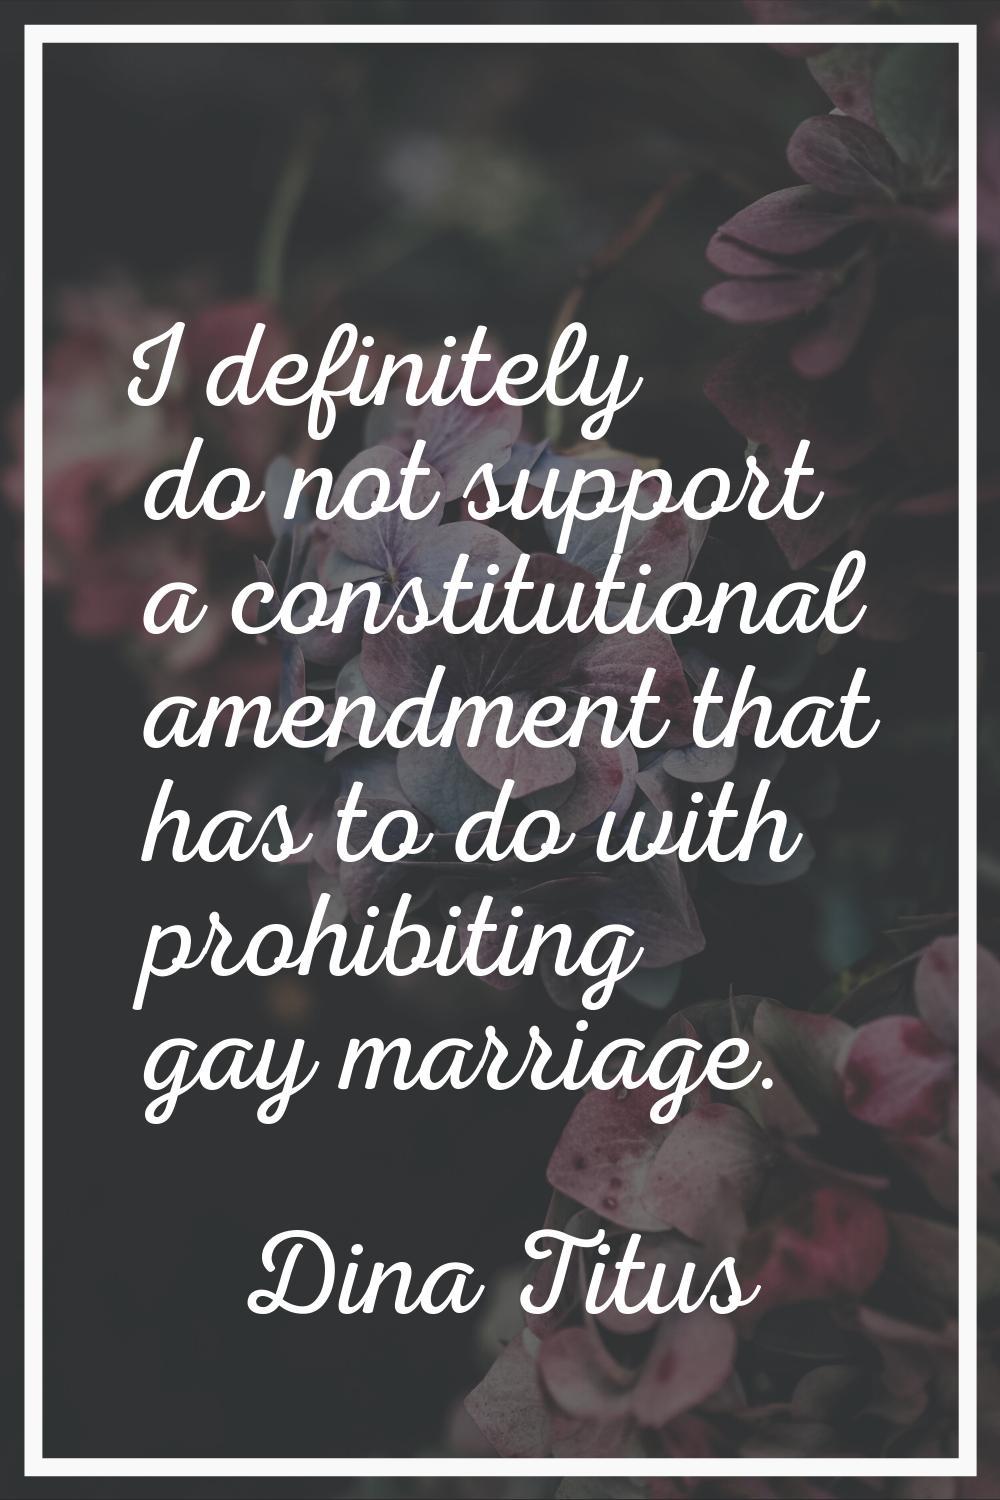 I definitely do not support a constitutional amendment that has to do with prohibiting gay marriage